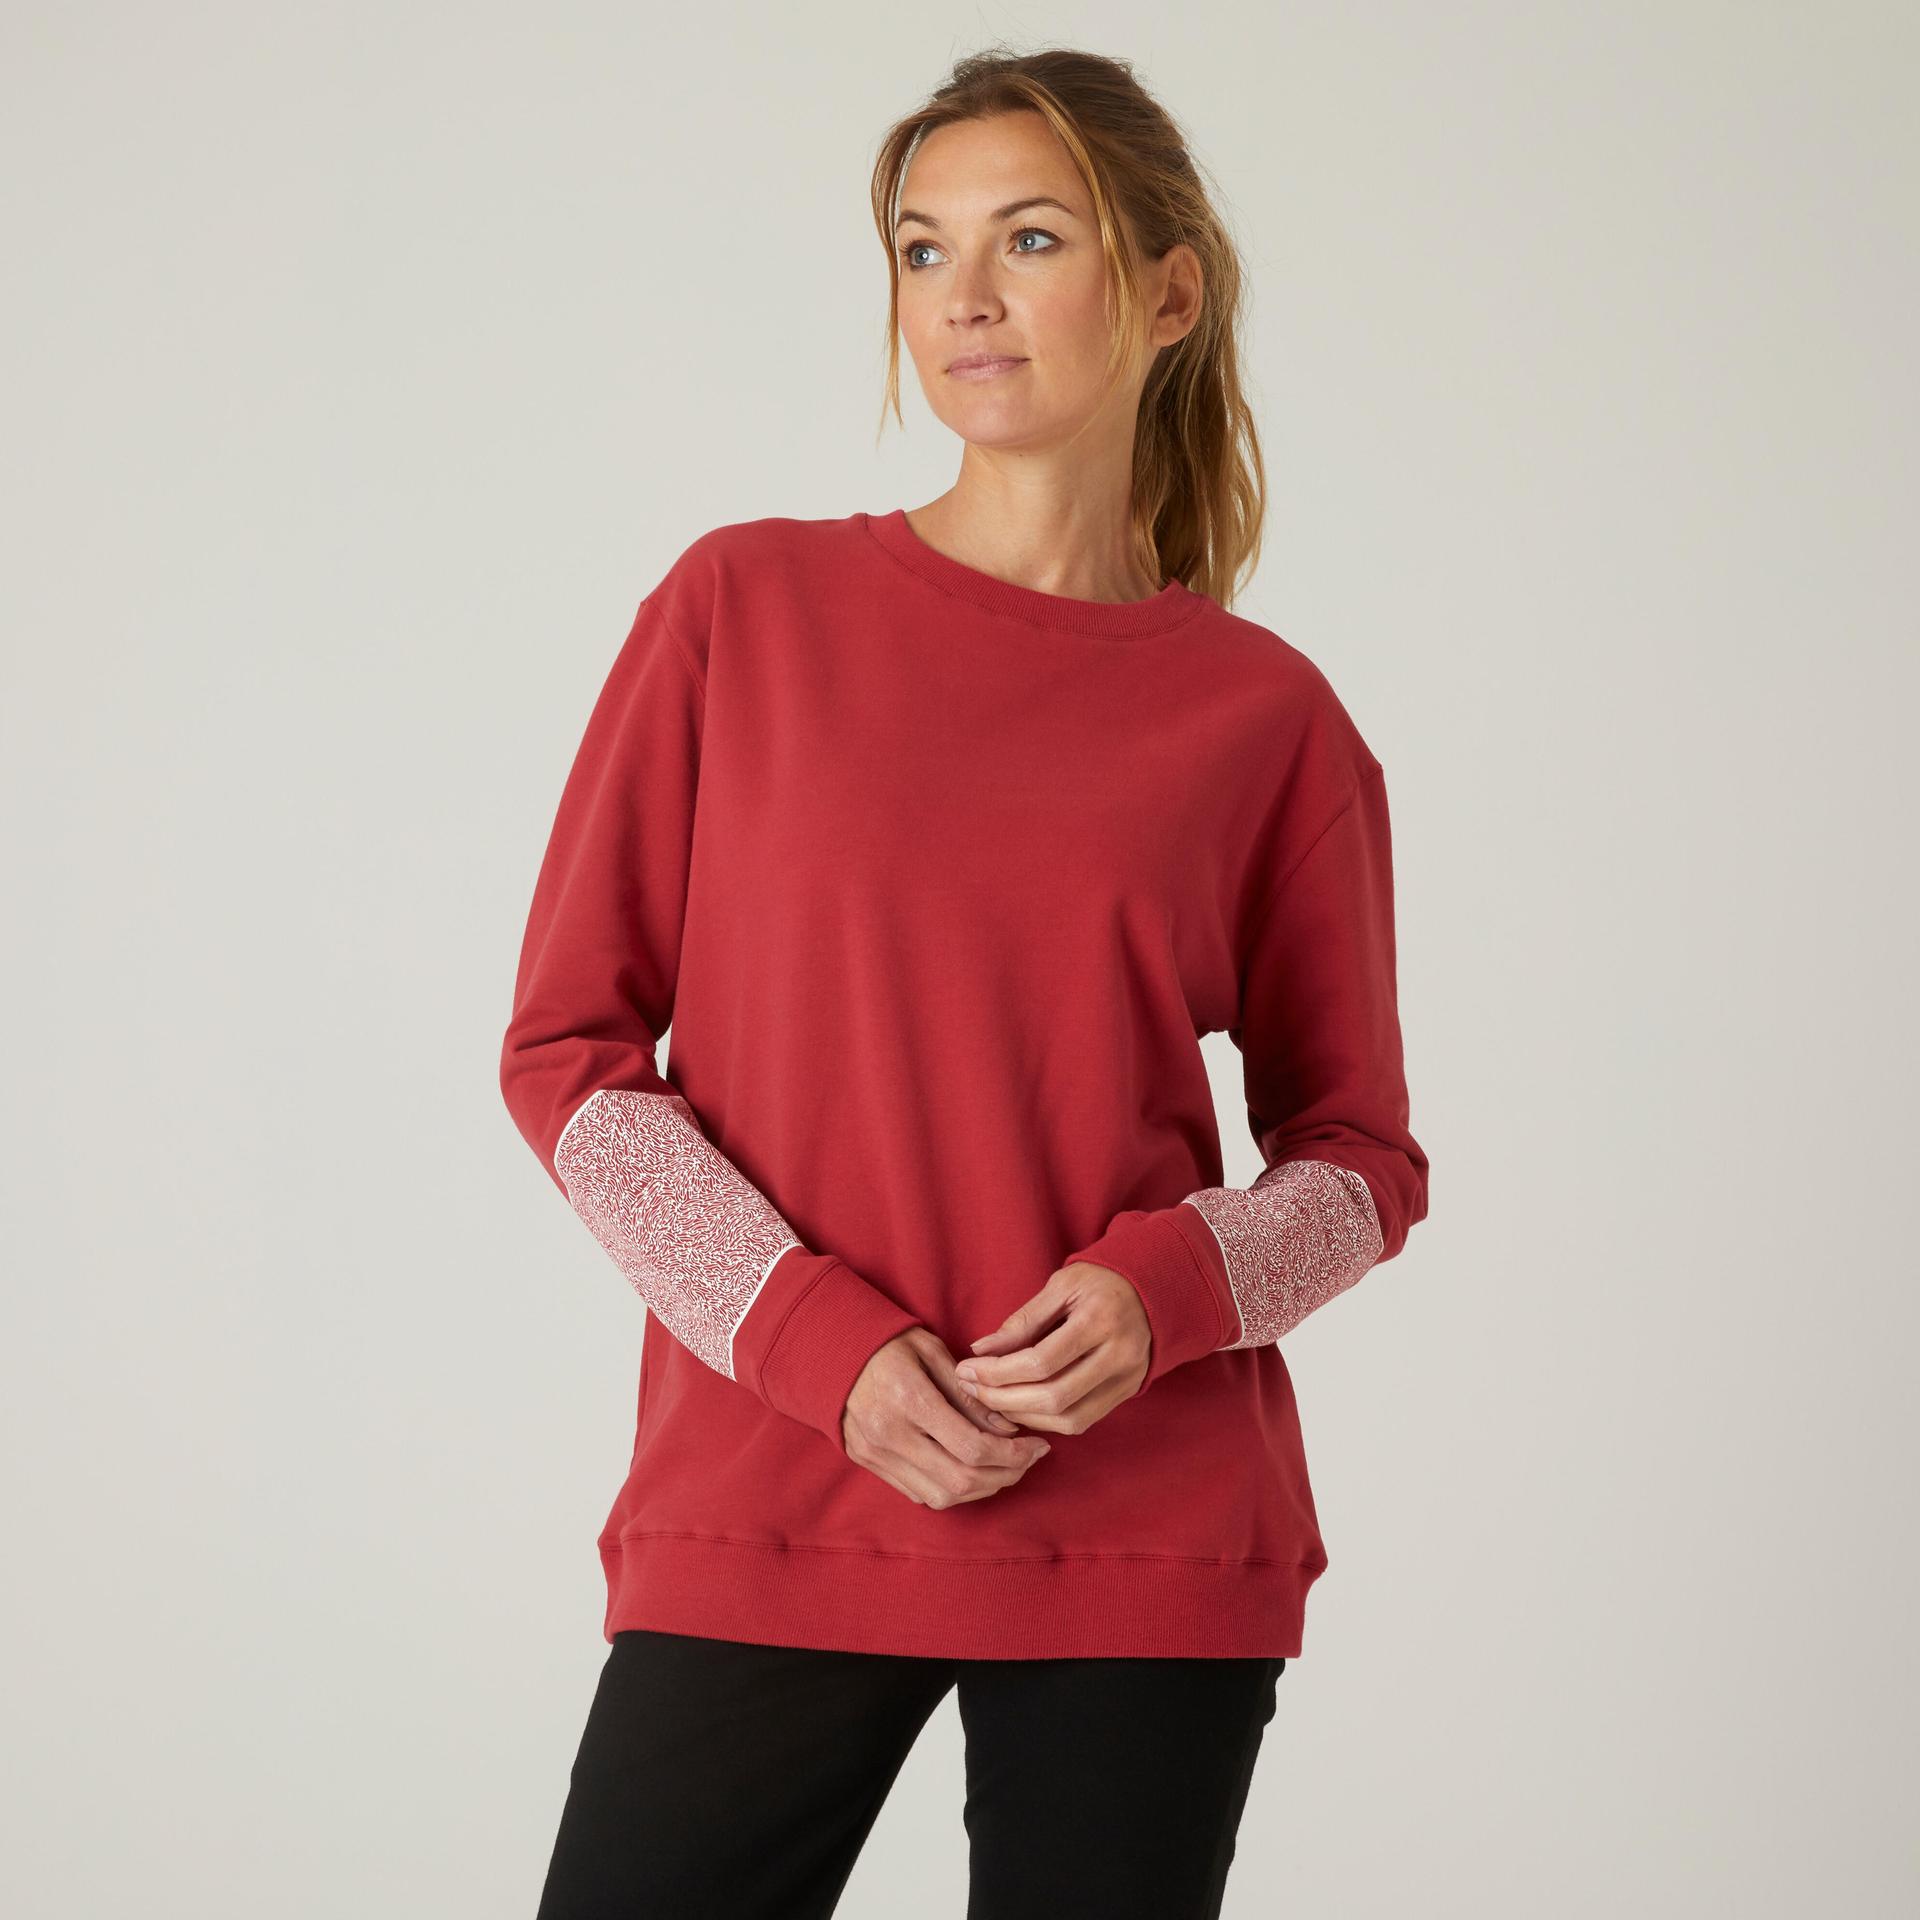 women-cotton-blend-french-terry-gym-sweater-100-----red-print